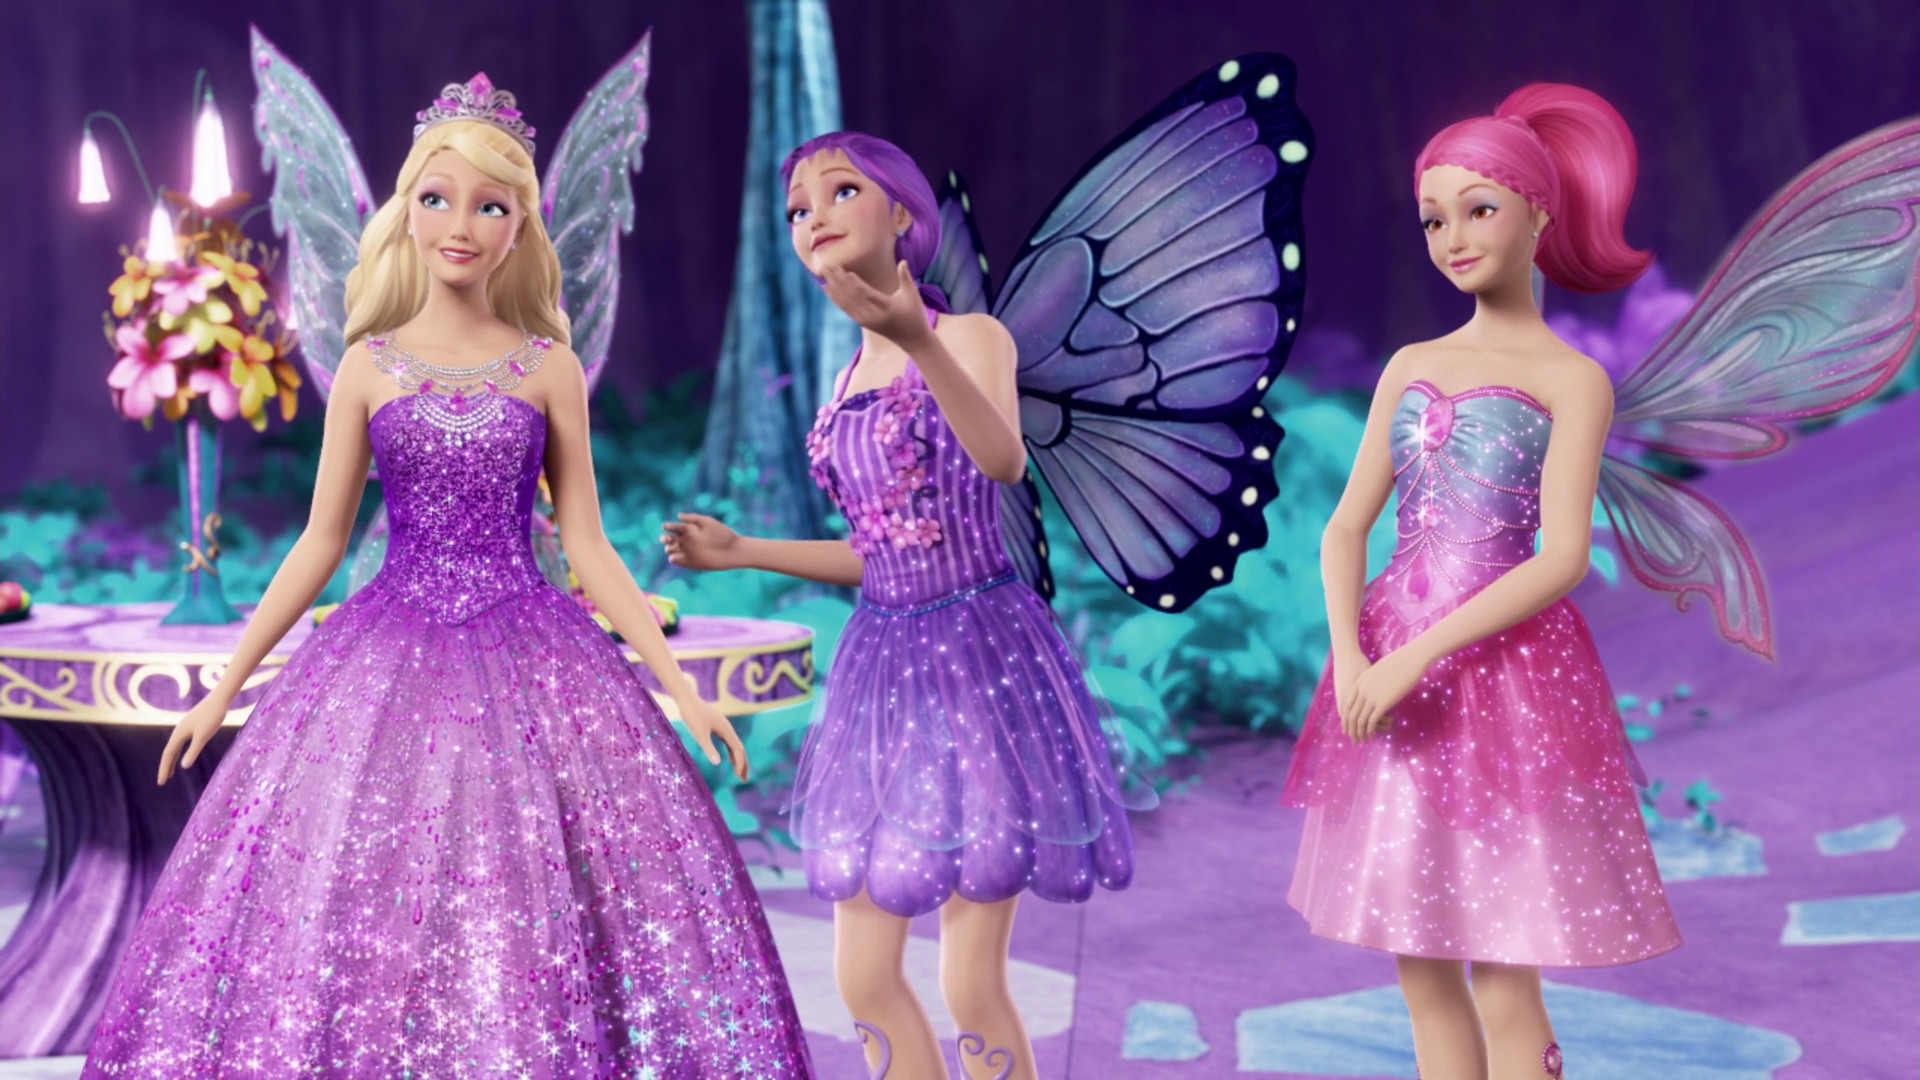 1920x1080 Barbie Movies images M&FP HD HD wallpaper and background photos